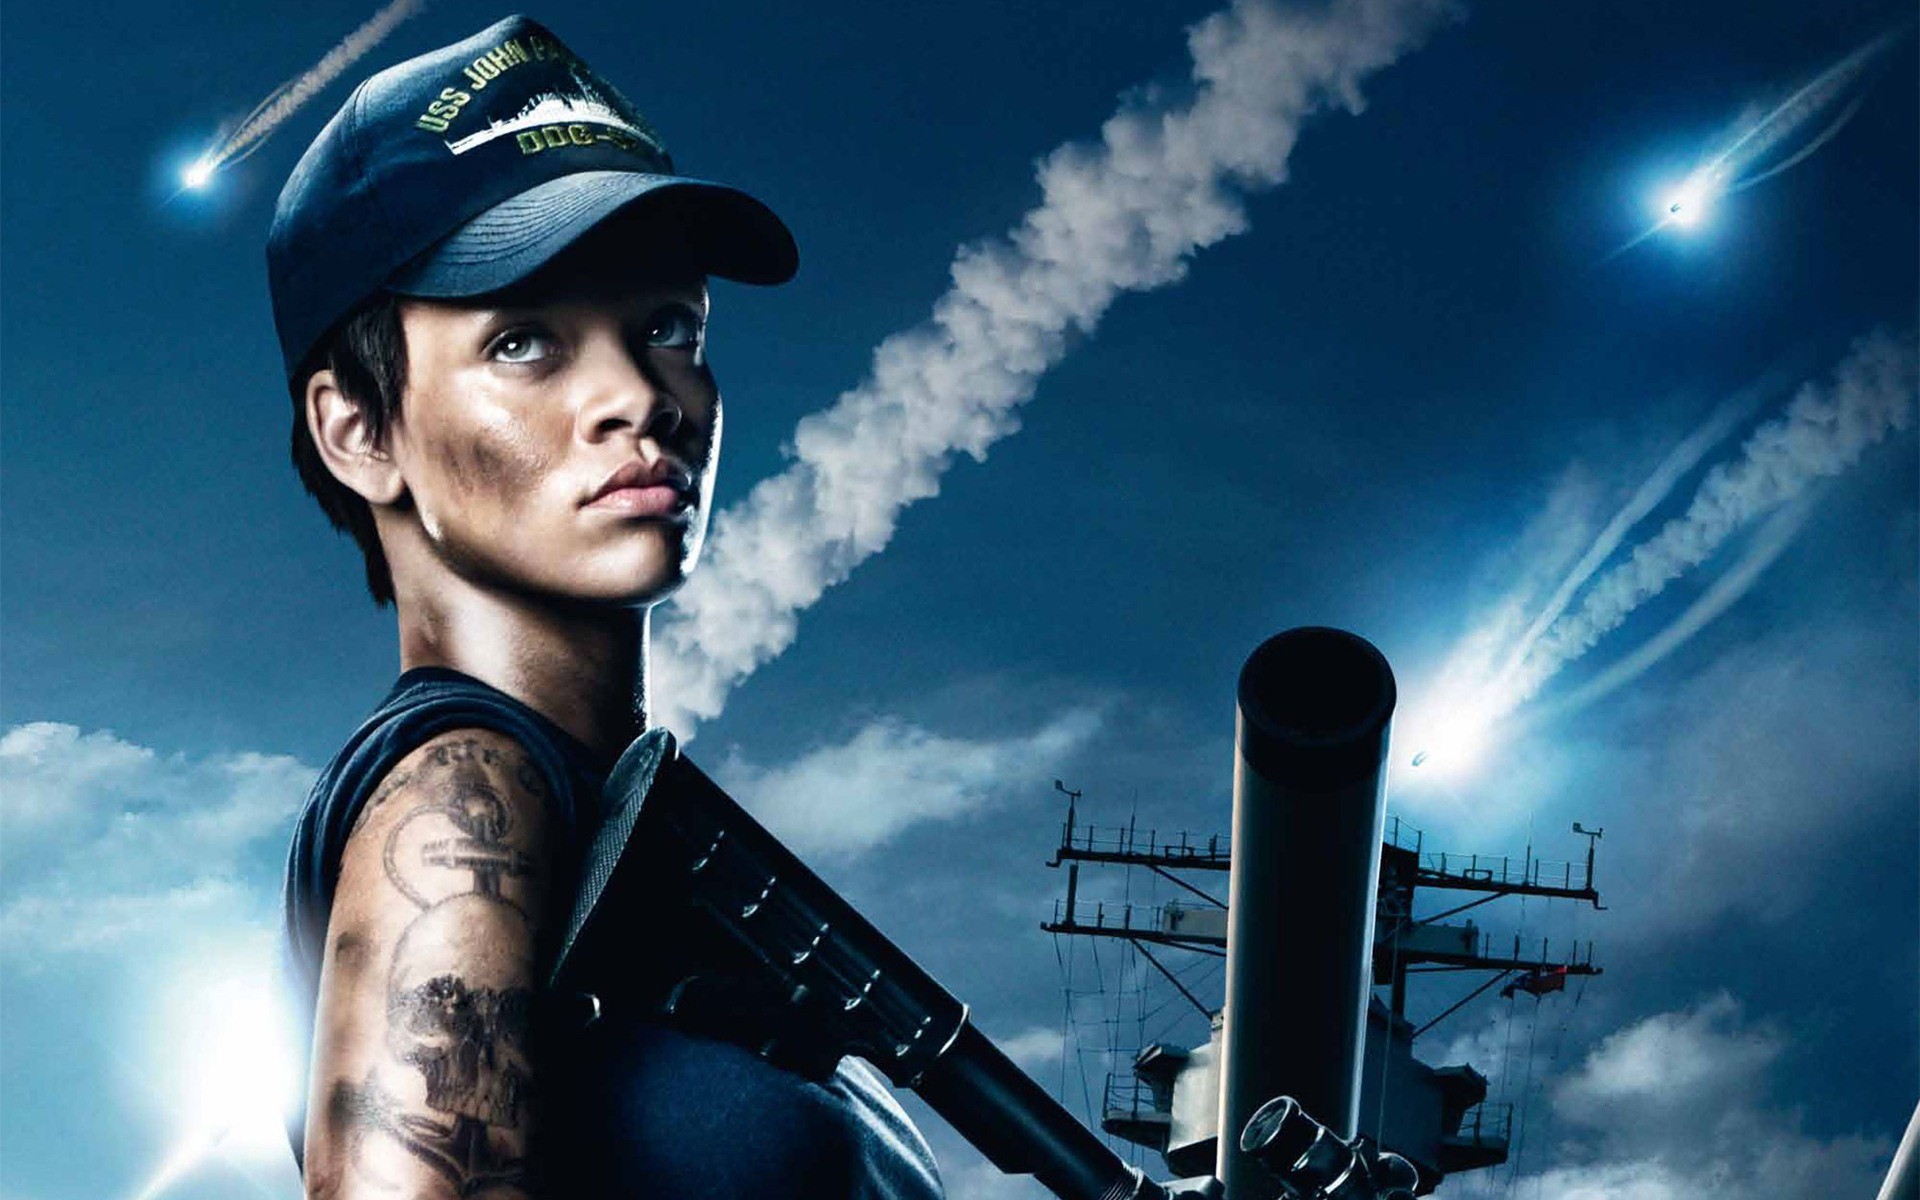 Movies actress rihanna people celebrity battleship girls with guns singers skyscapes wallpaperx1200